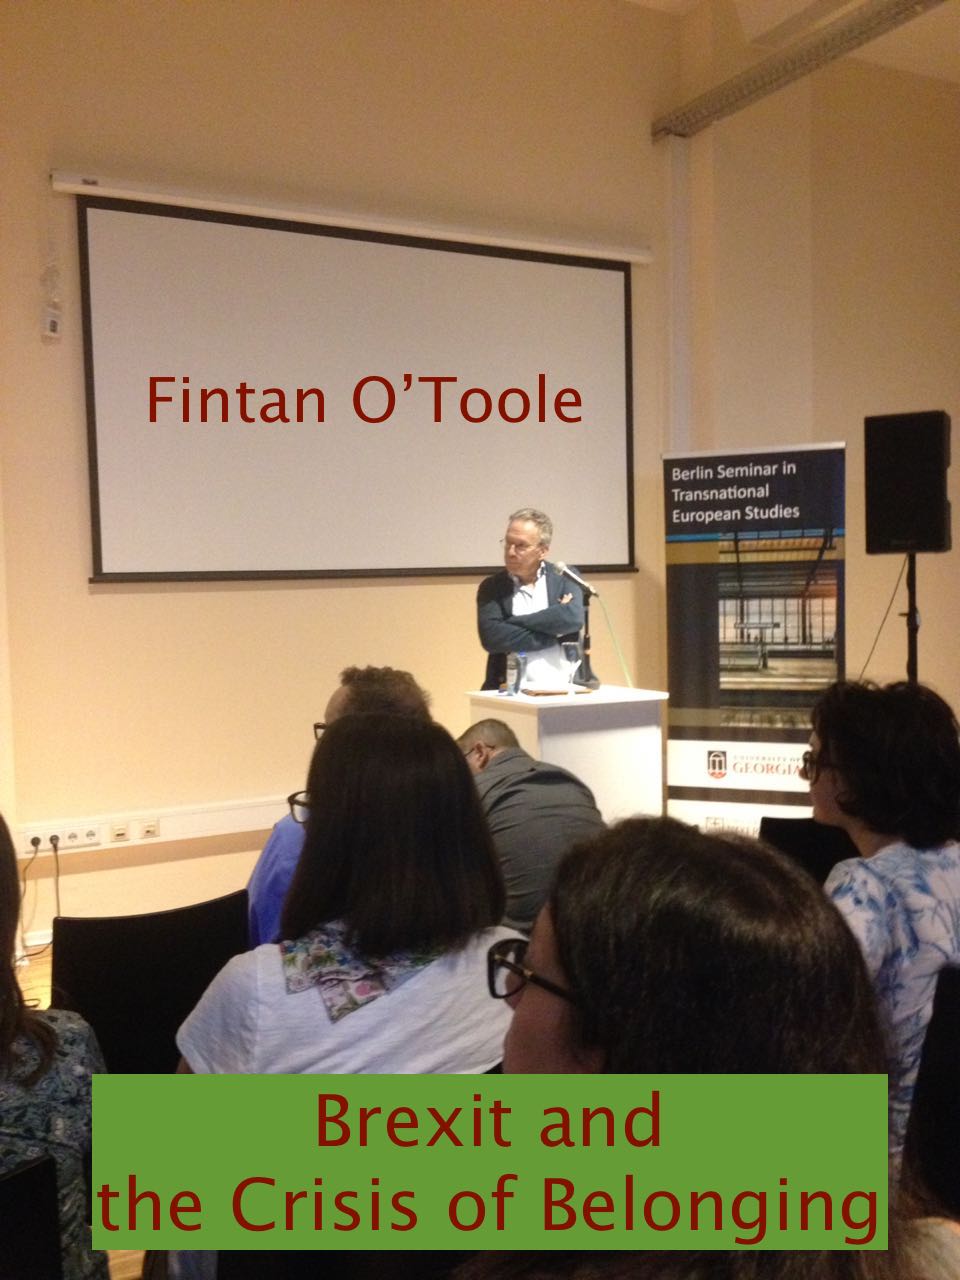 Fintan O’Toole – Brexit and the Crisis of Belonging